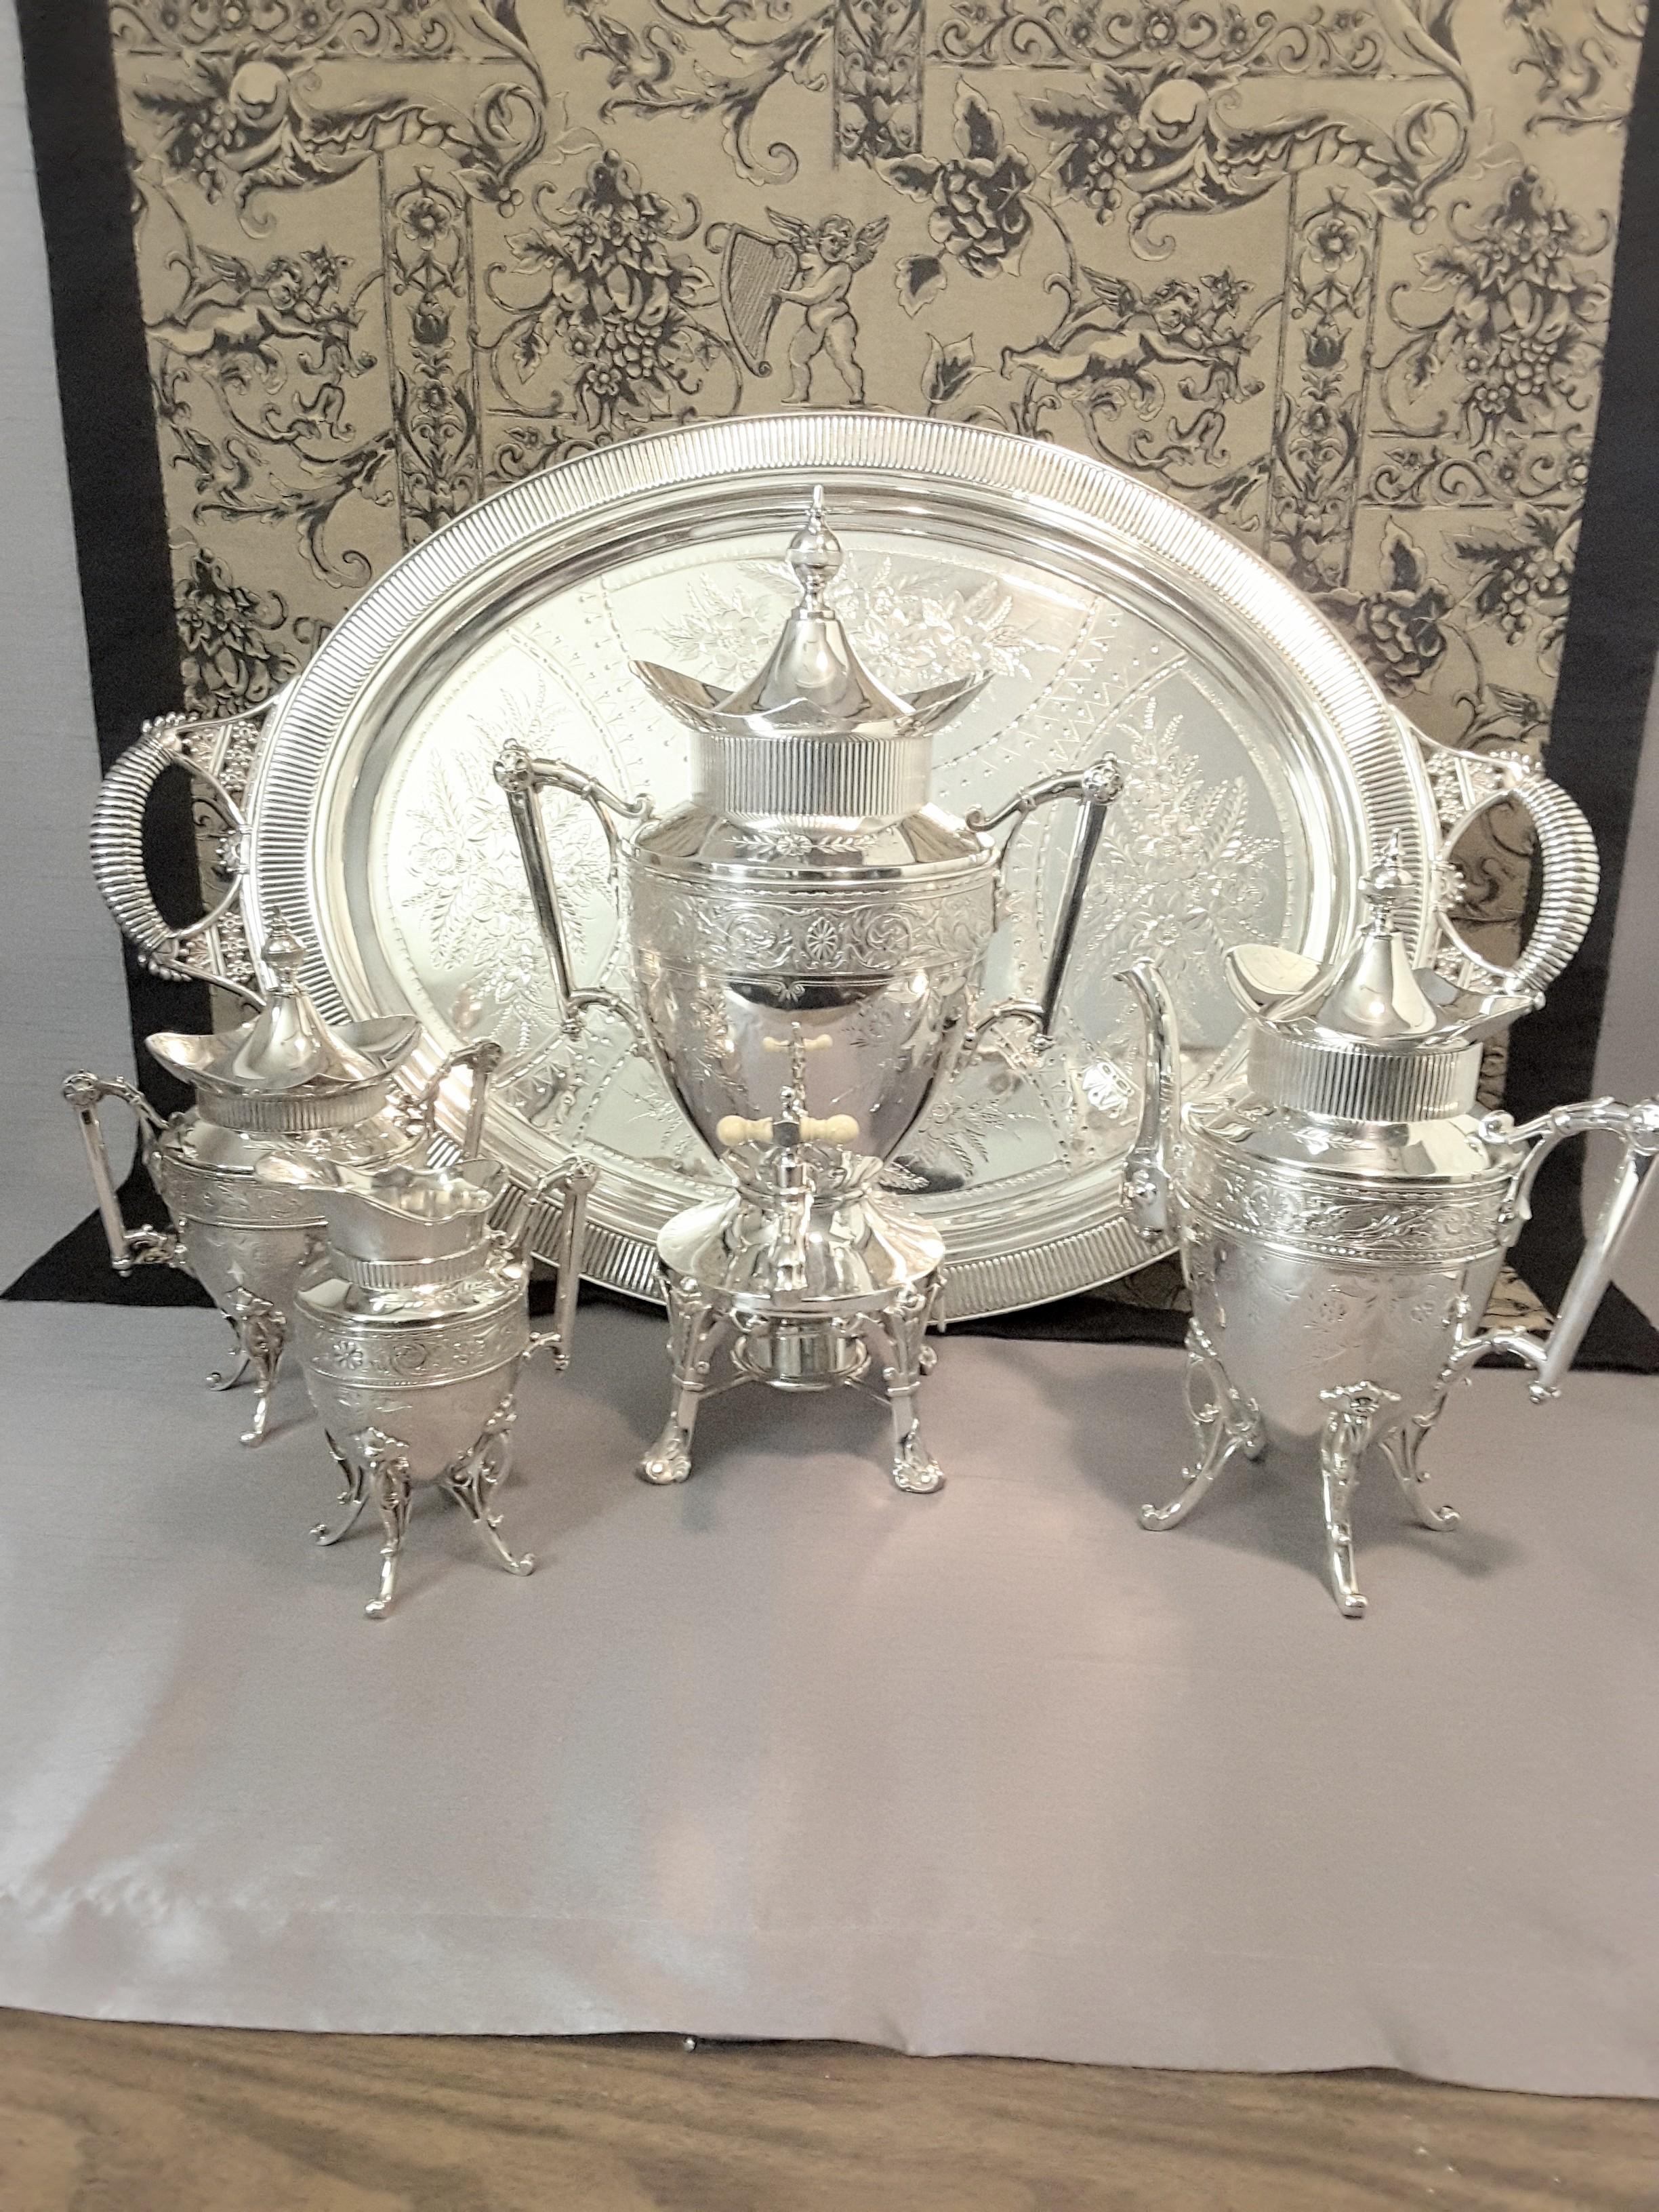 Exquisite Aesthetic Movement Silverplated Tea Service by Simpson, Hall & Miller For Sale 10